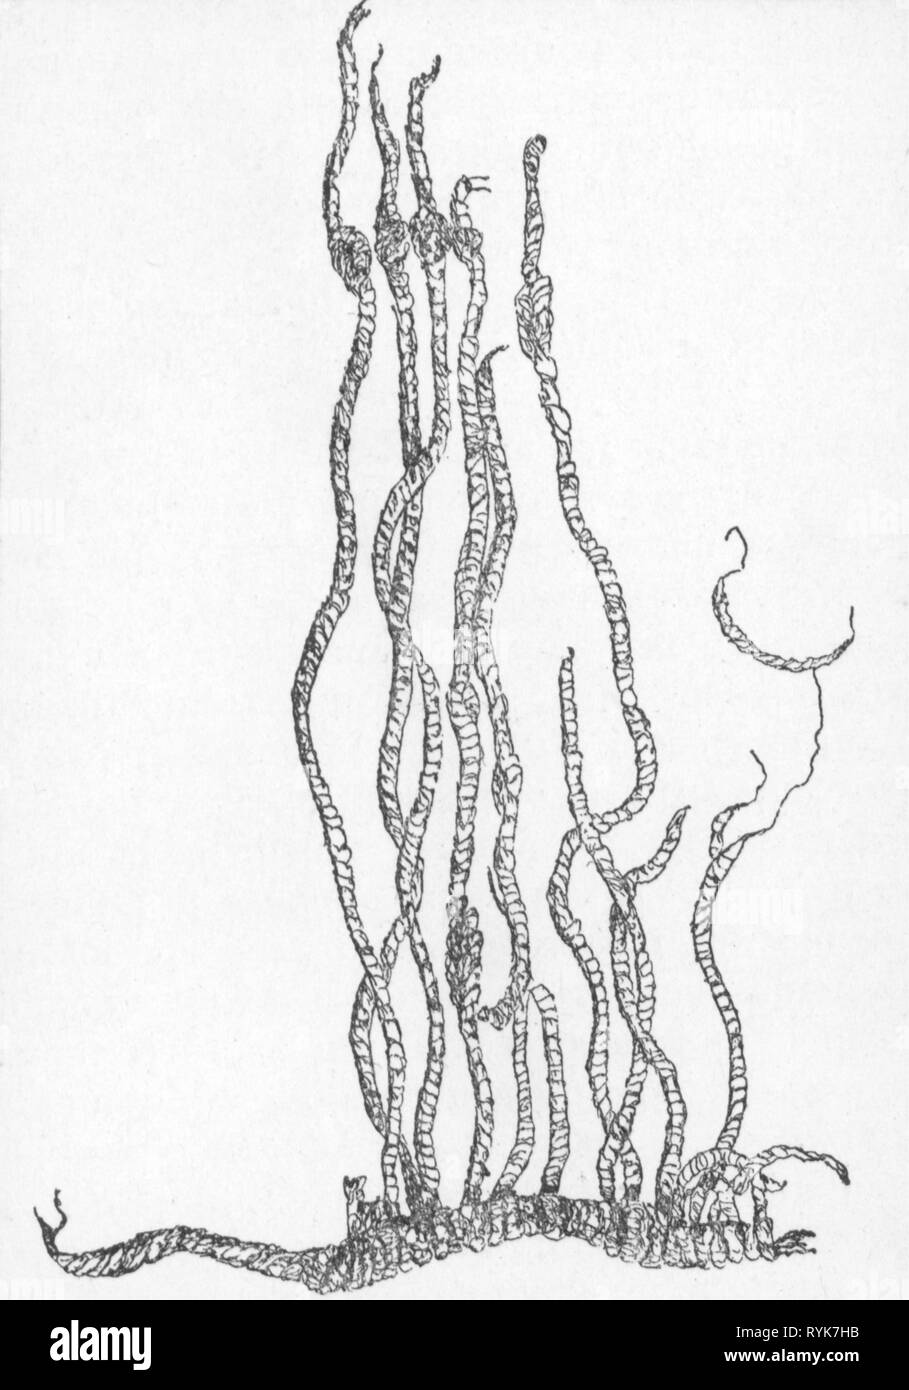 script, knot script (Quipu), South America circa 2500 BC - 1532 AD, knot cord, wood engraving, 19th century, Khipu, mail, post, transmission, transmissions, Inca, Peru, Caral, string, strings, knot, knots, archivings, electronic archiving, accounting, accounting and billing, communication, communications, , America, script, scripts, historic, historical, Artist's Copyright has not to be cleared Stock Photo